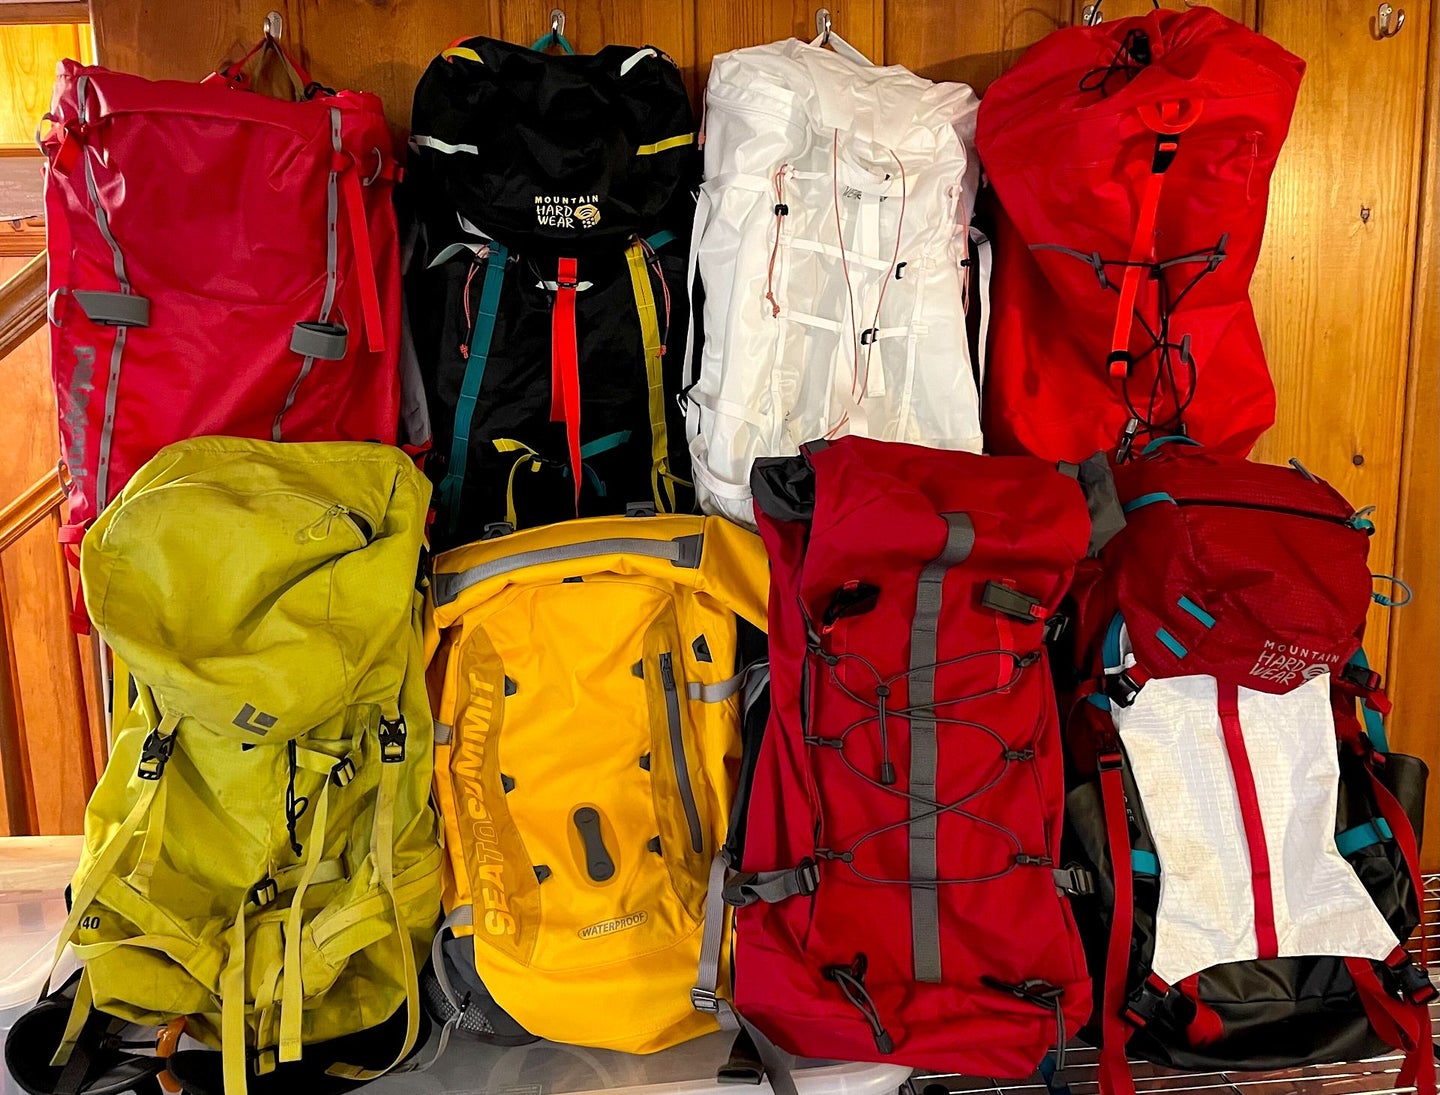 All of the climbing packs tested in this article.